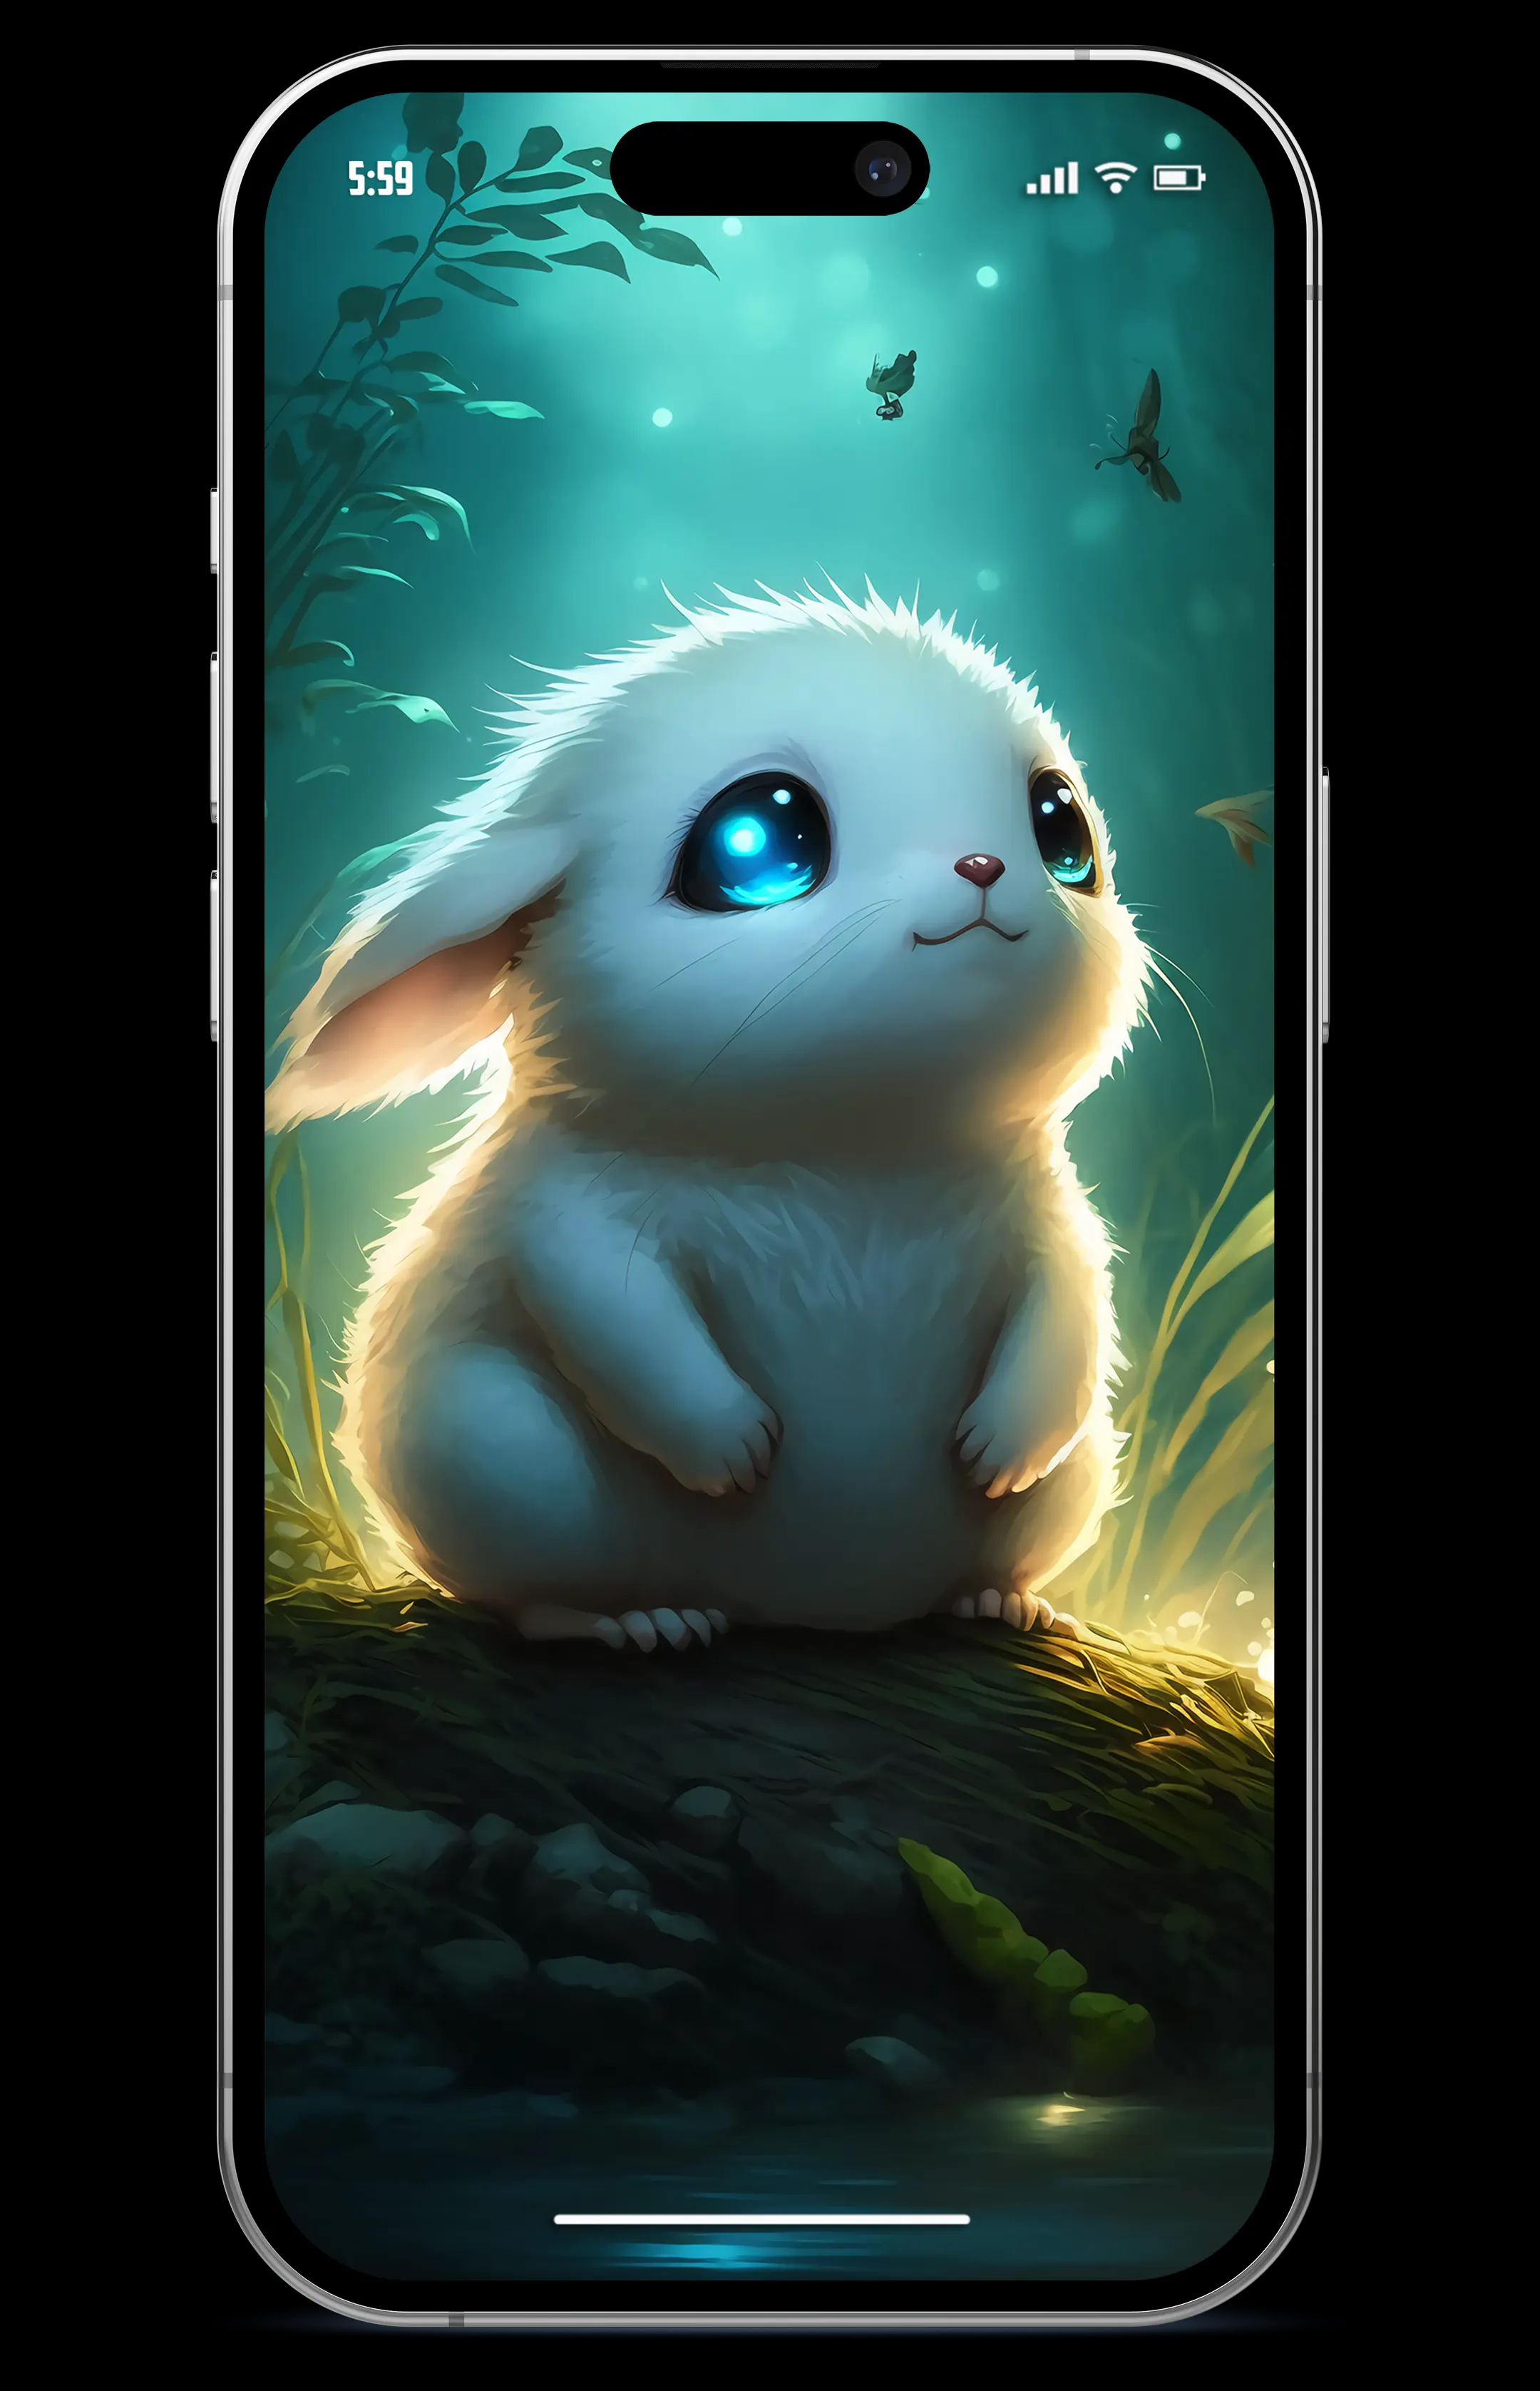 Cute Bunny Wallpaper For Your Phone